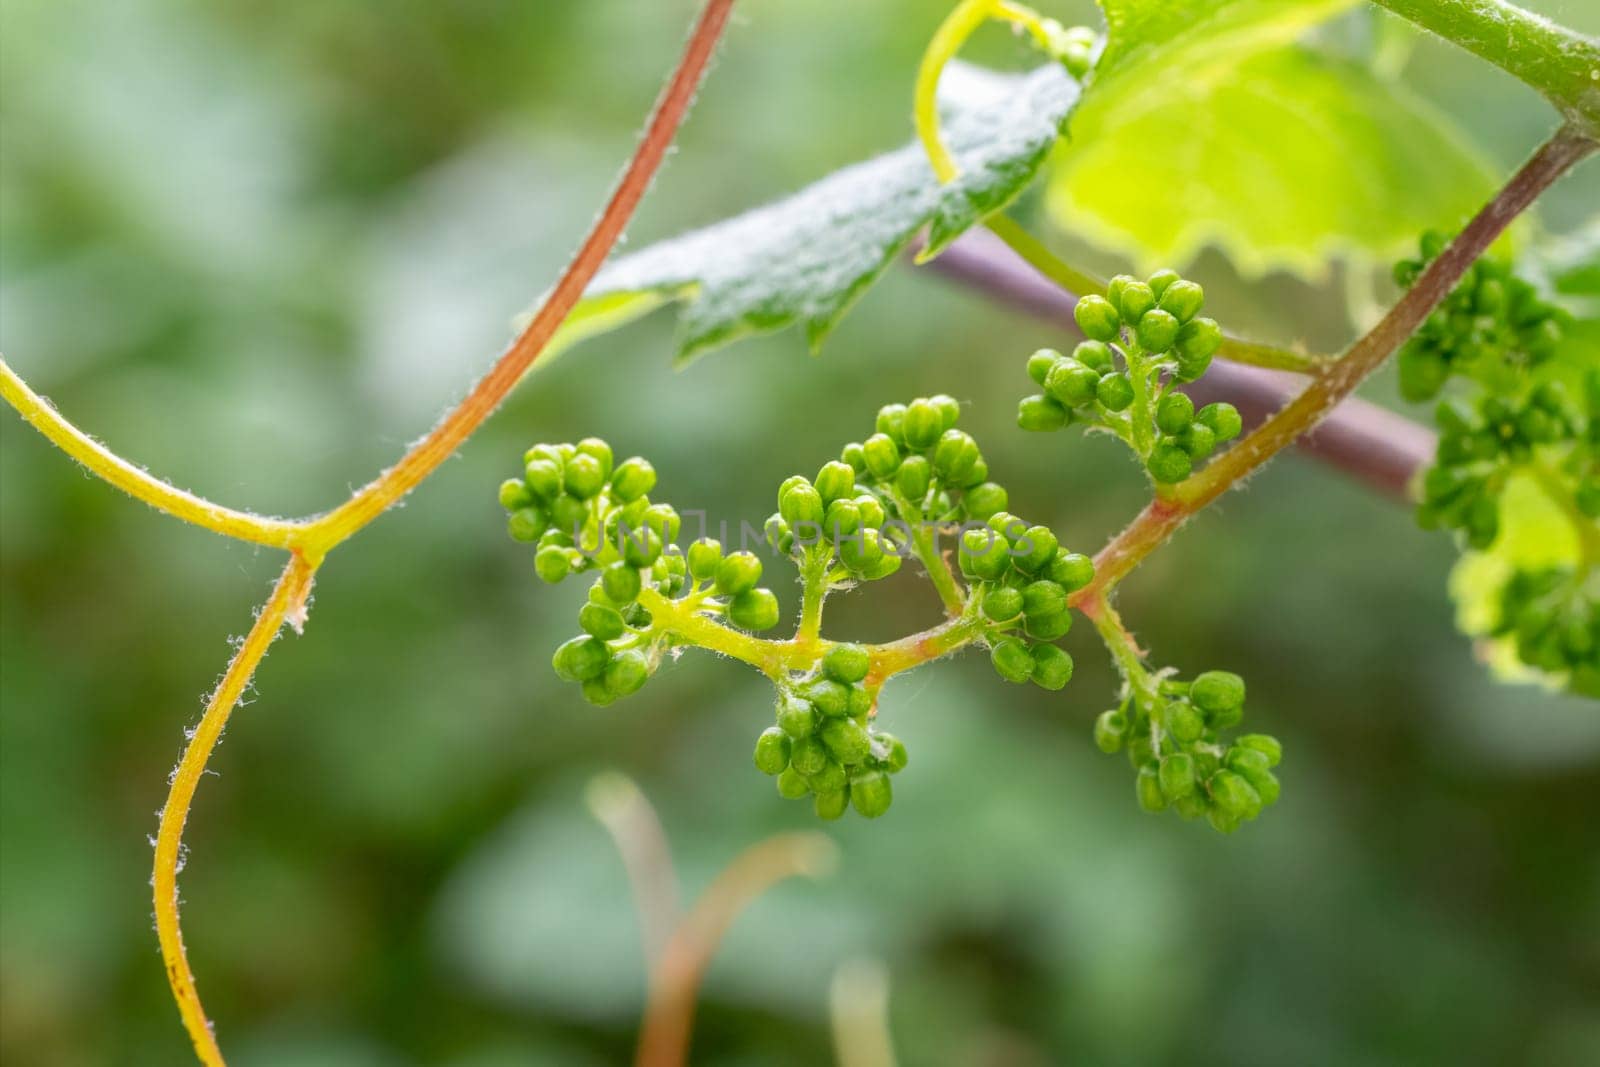 Young wine grapes in vineyard in the spring time. by mvg6894